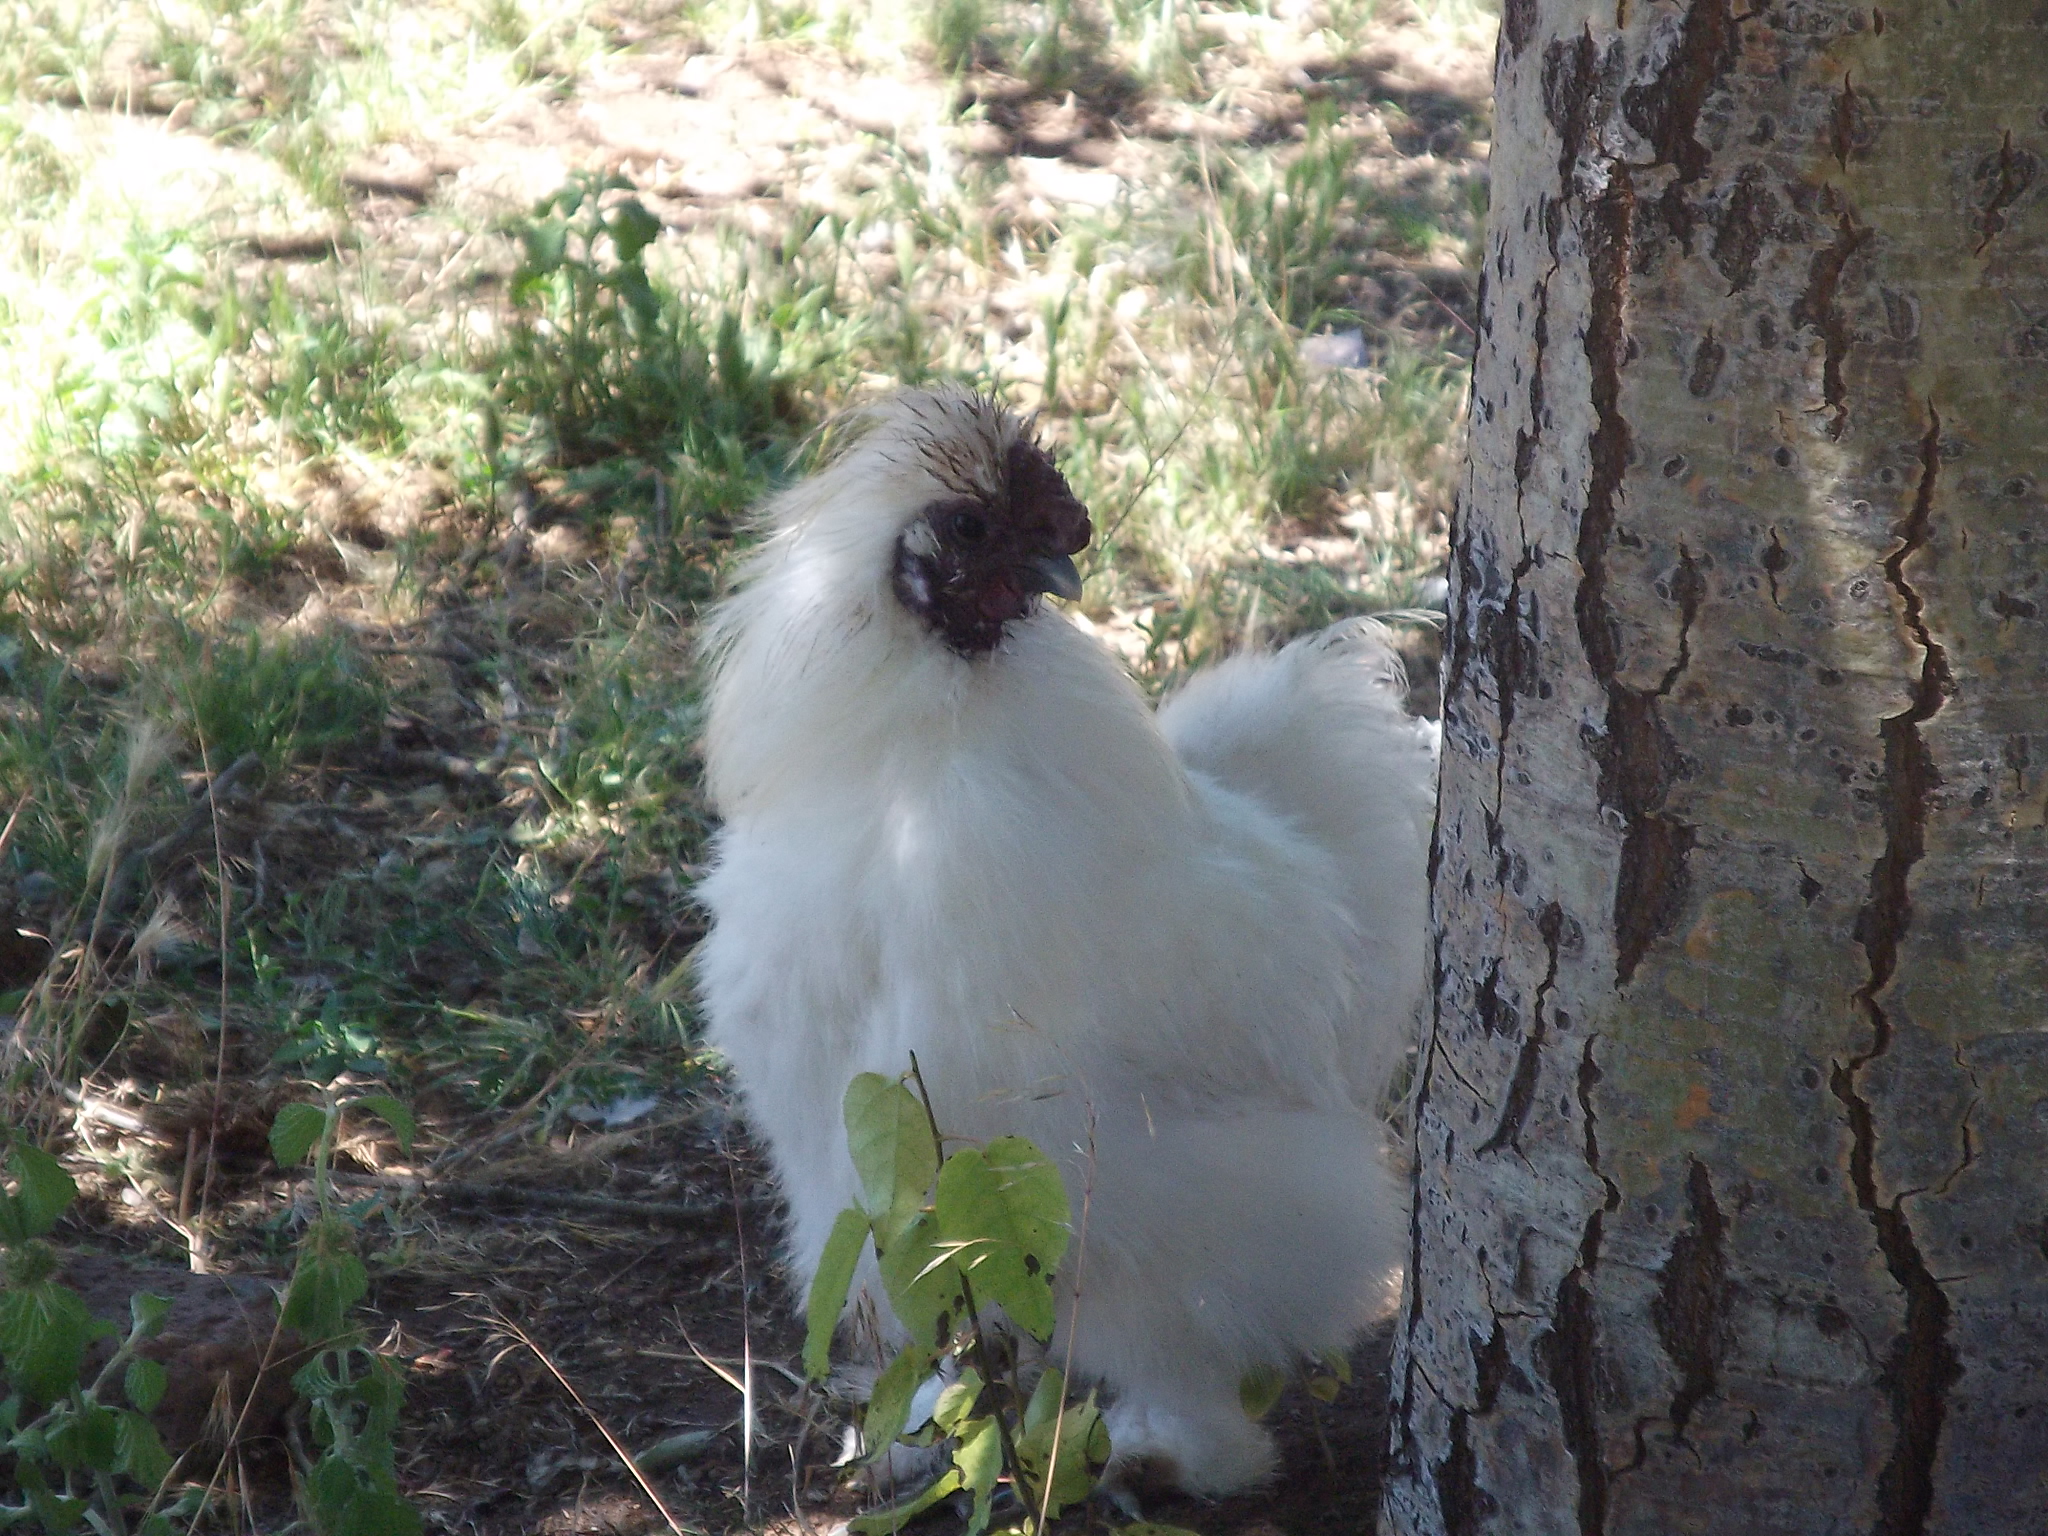 This simultaneously handsome and silly-looking boy here is one we call George. He's our most tamed chicken and will come when called. He's also very soft! He's my favorite chicken of our whole flock and I don't know what I could do without him.

Btw- His breed is Silkie in case you hadn't noticed yet ;)